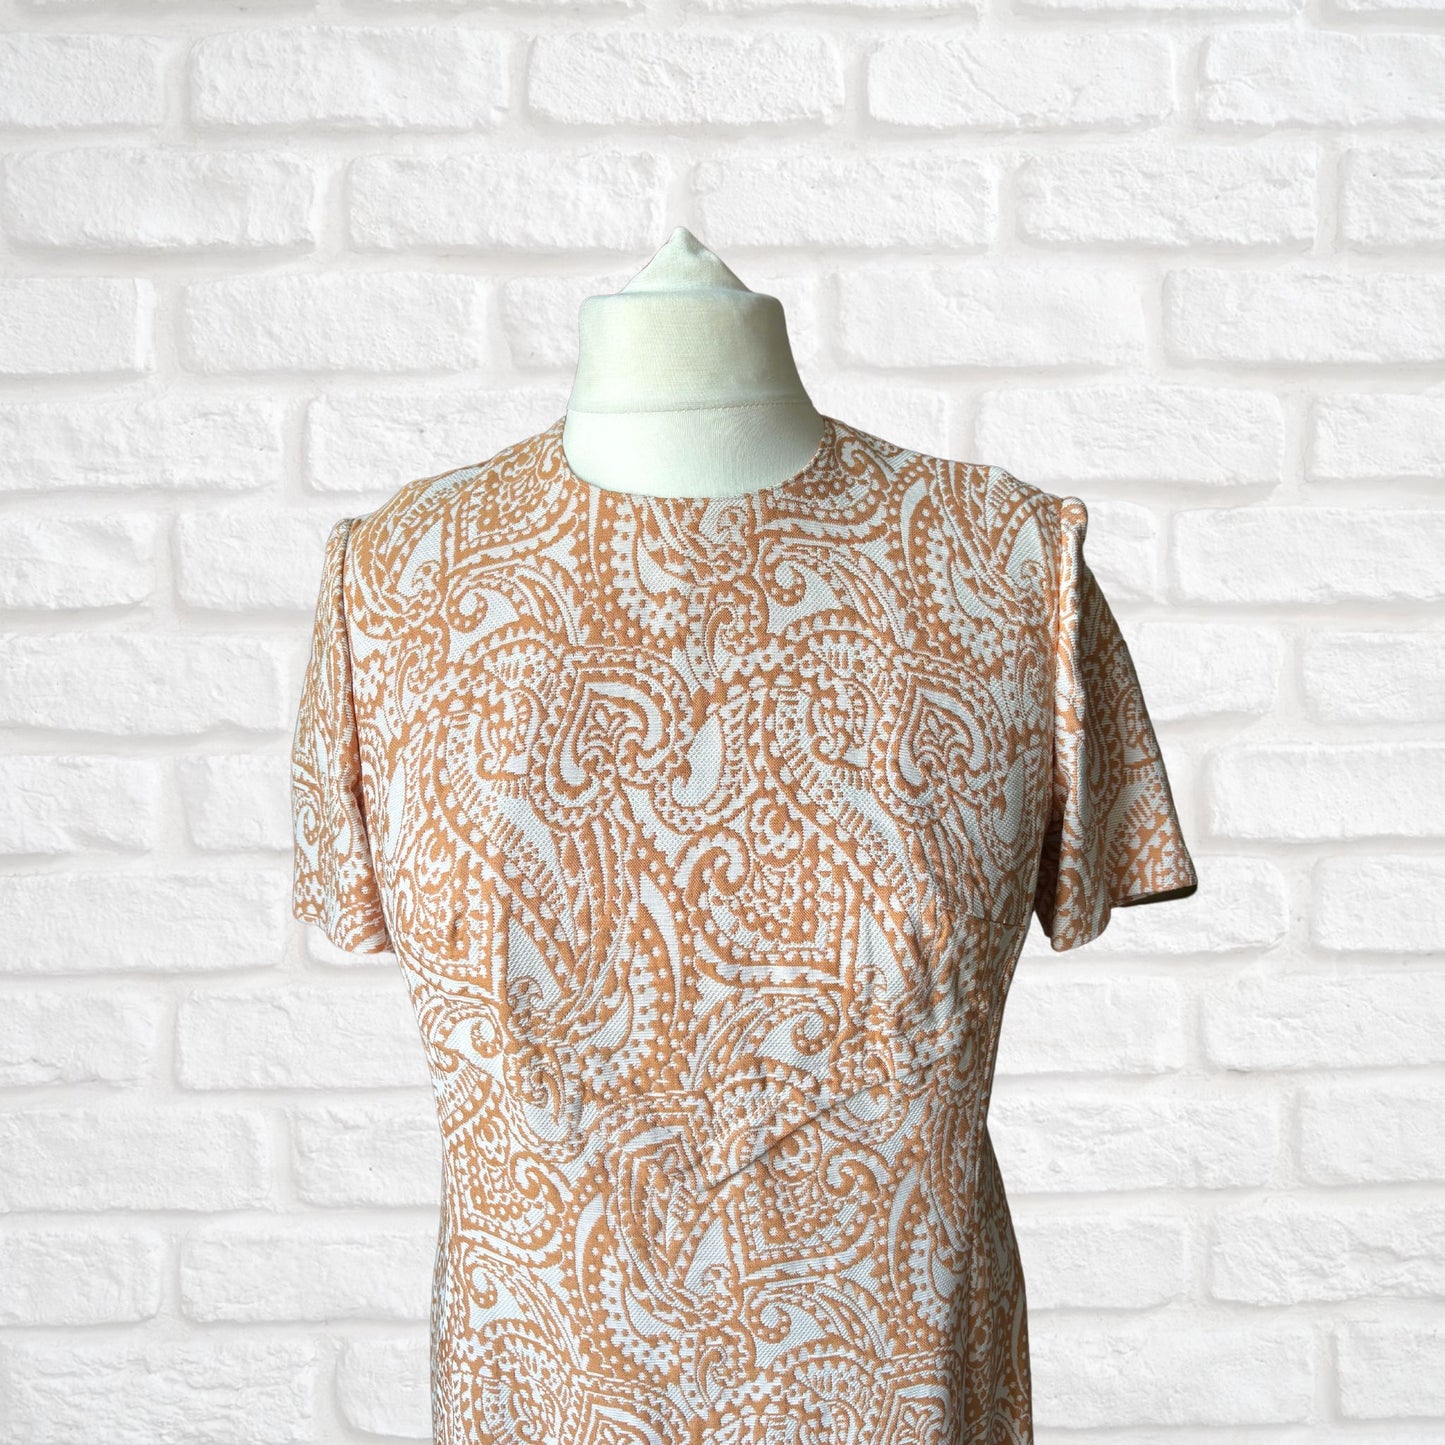 Vintage White and Peach Paisley Brocade 60s Scooter Dress  . Approx U.K.size 16